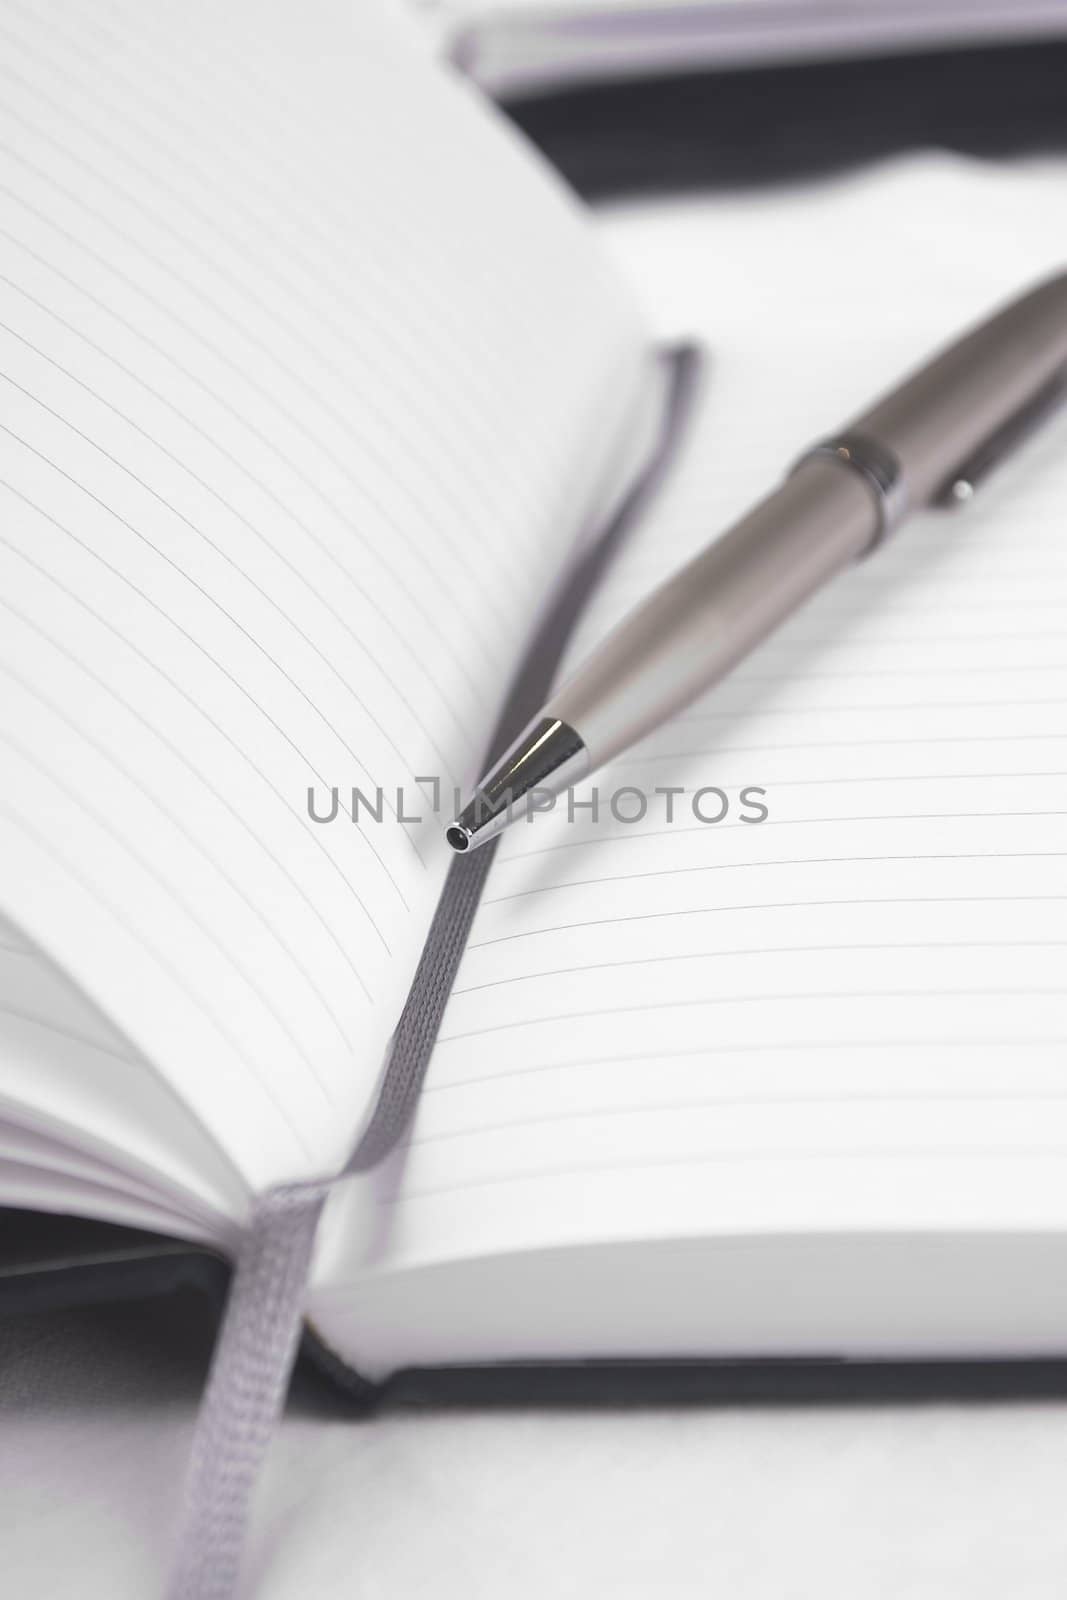 Lined notebook and a ballpoint pen